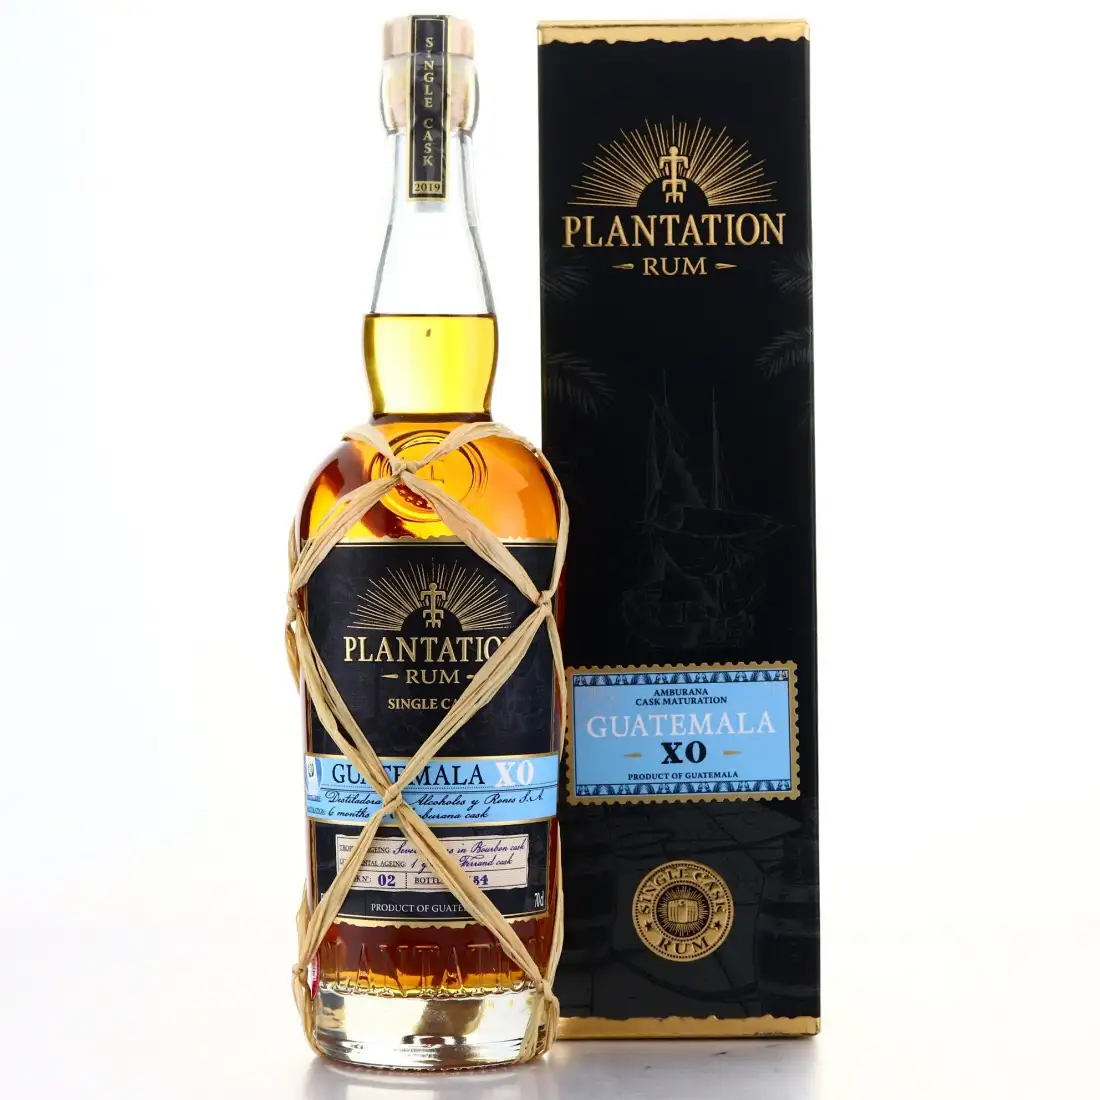 Image of the front of the bottle of the rum Plantation Guatemala XO (Edition 2019)